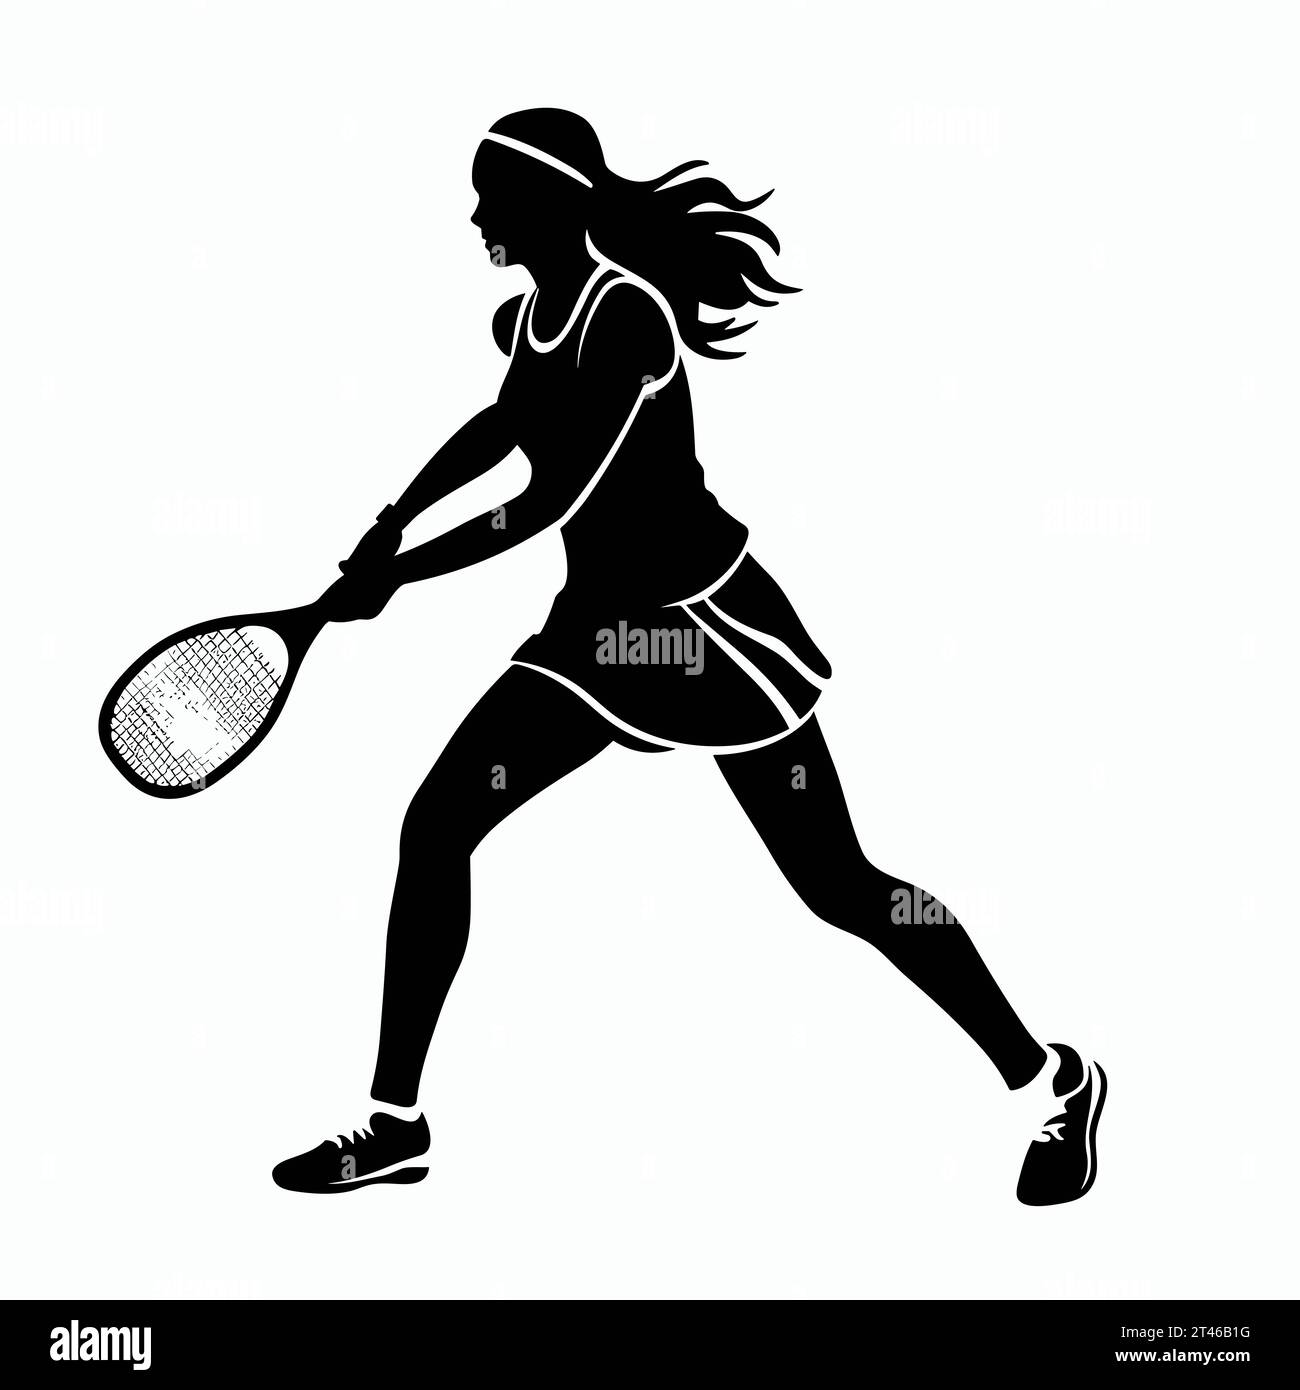 Female tennis player silhouette. Female tennis player black icon on white background Stock Vector